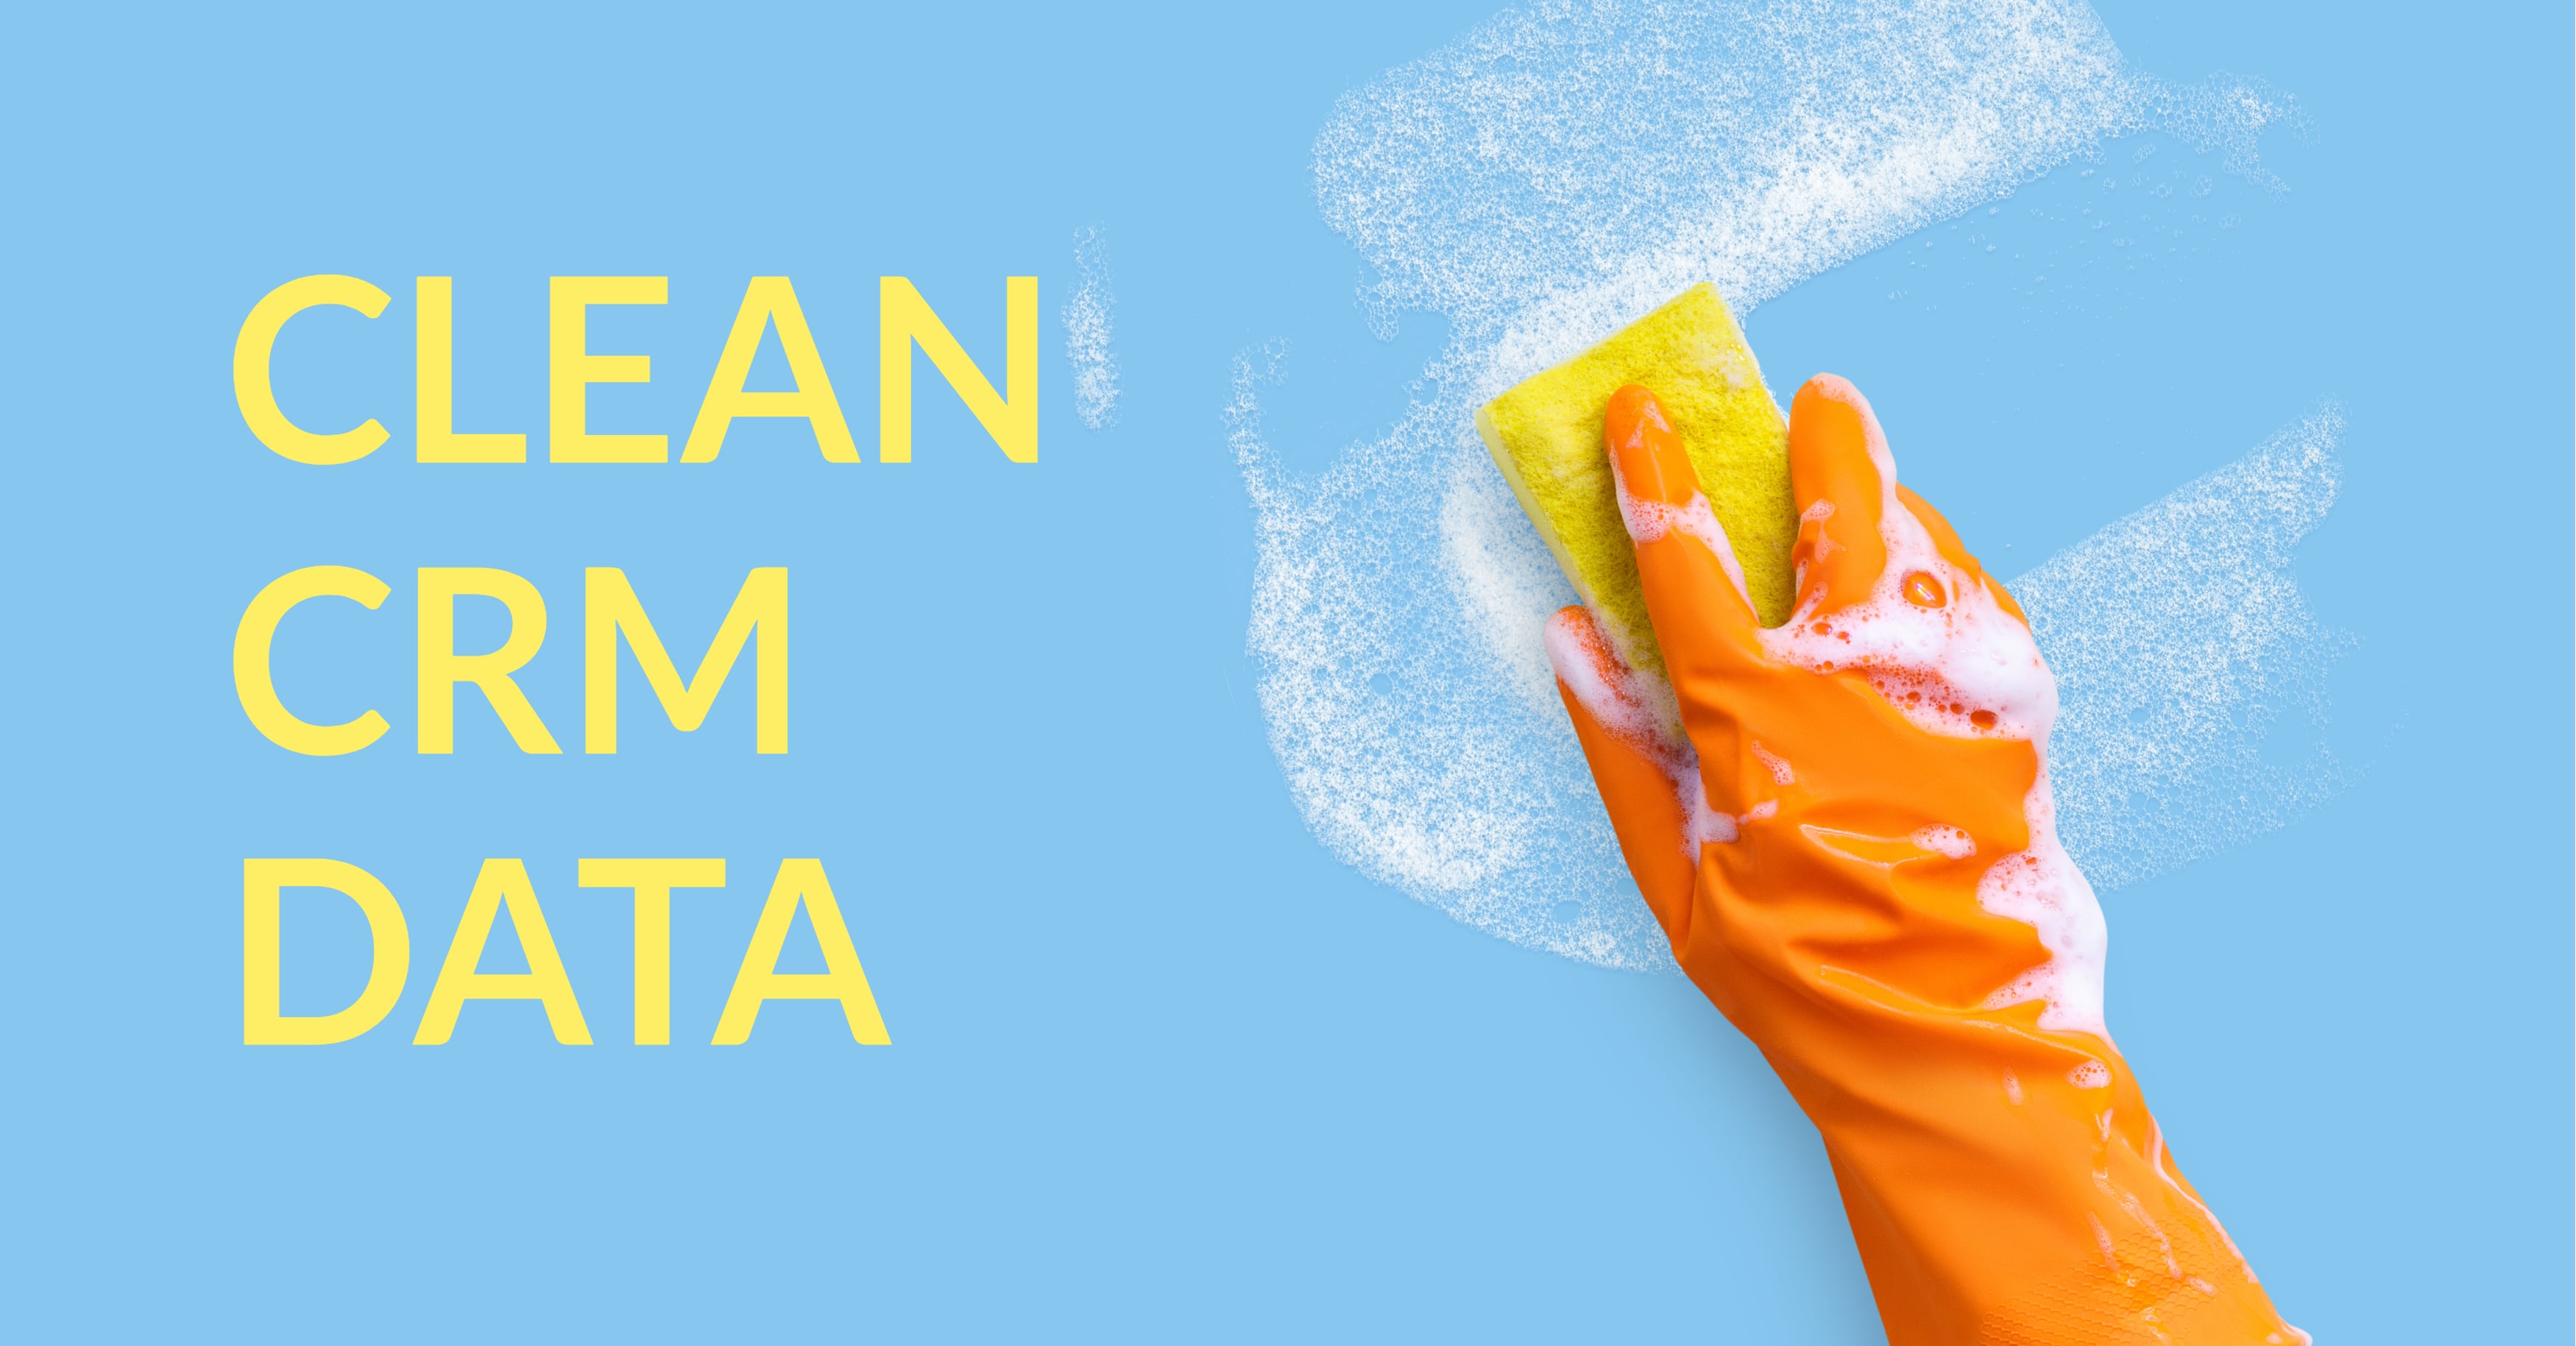 CRM Data Cleaning